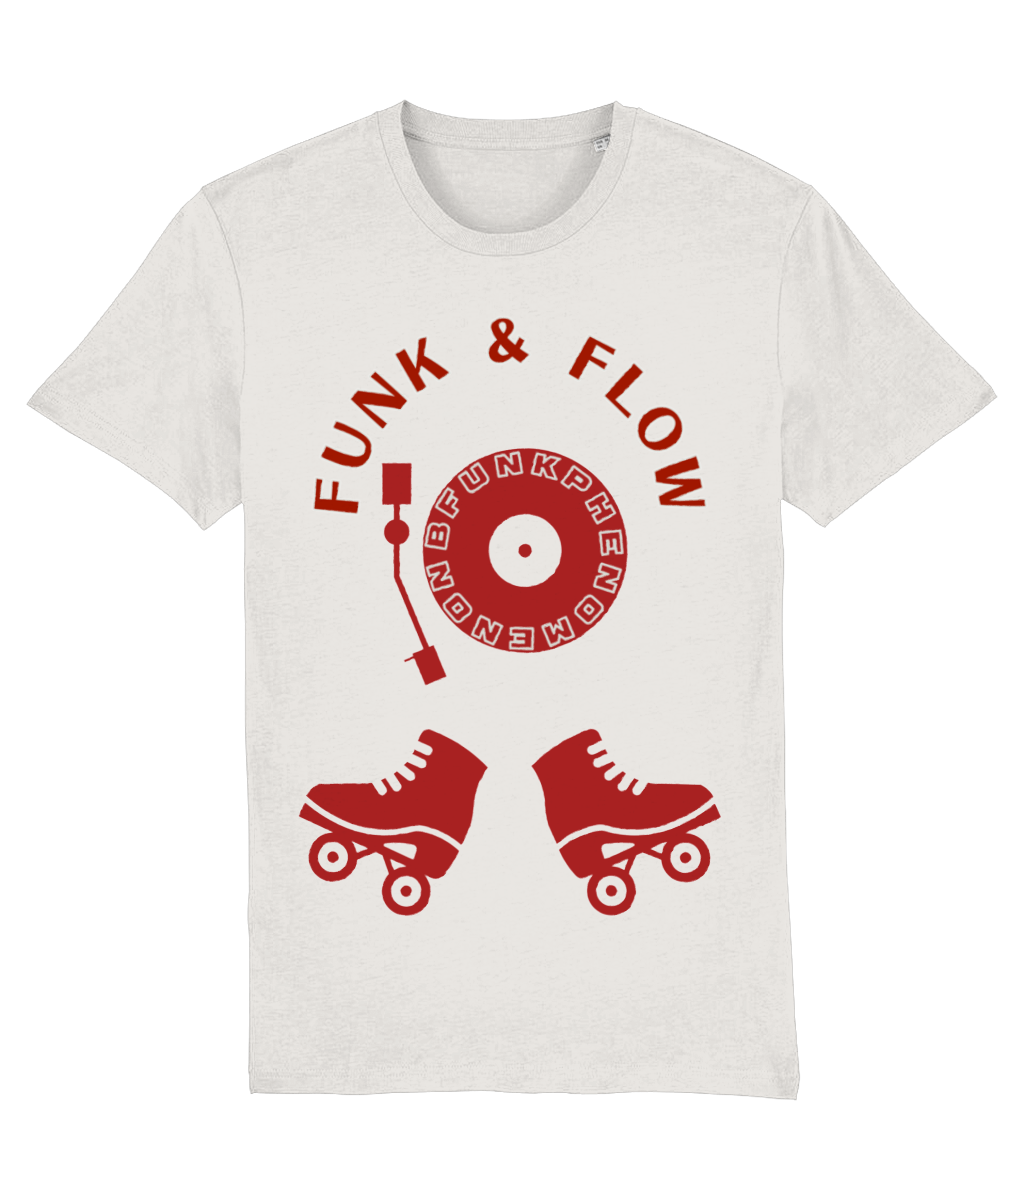 Tshirt Funk and Flow